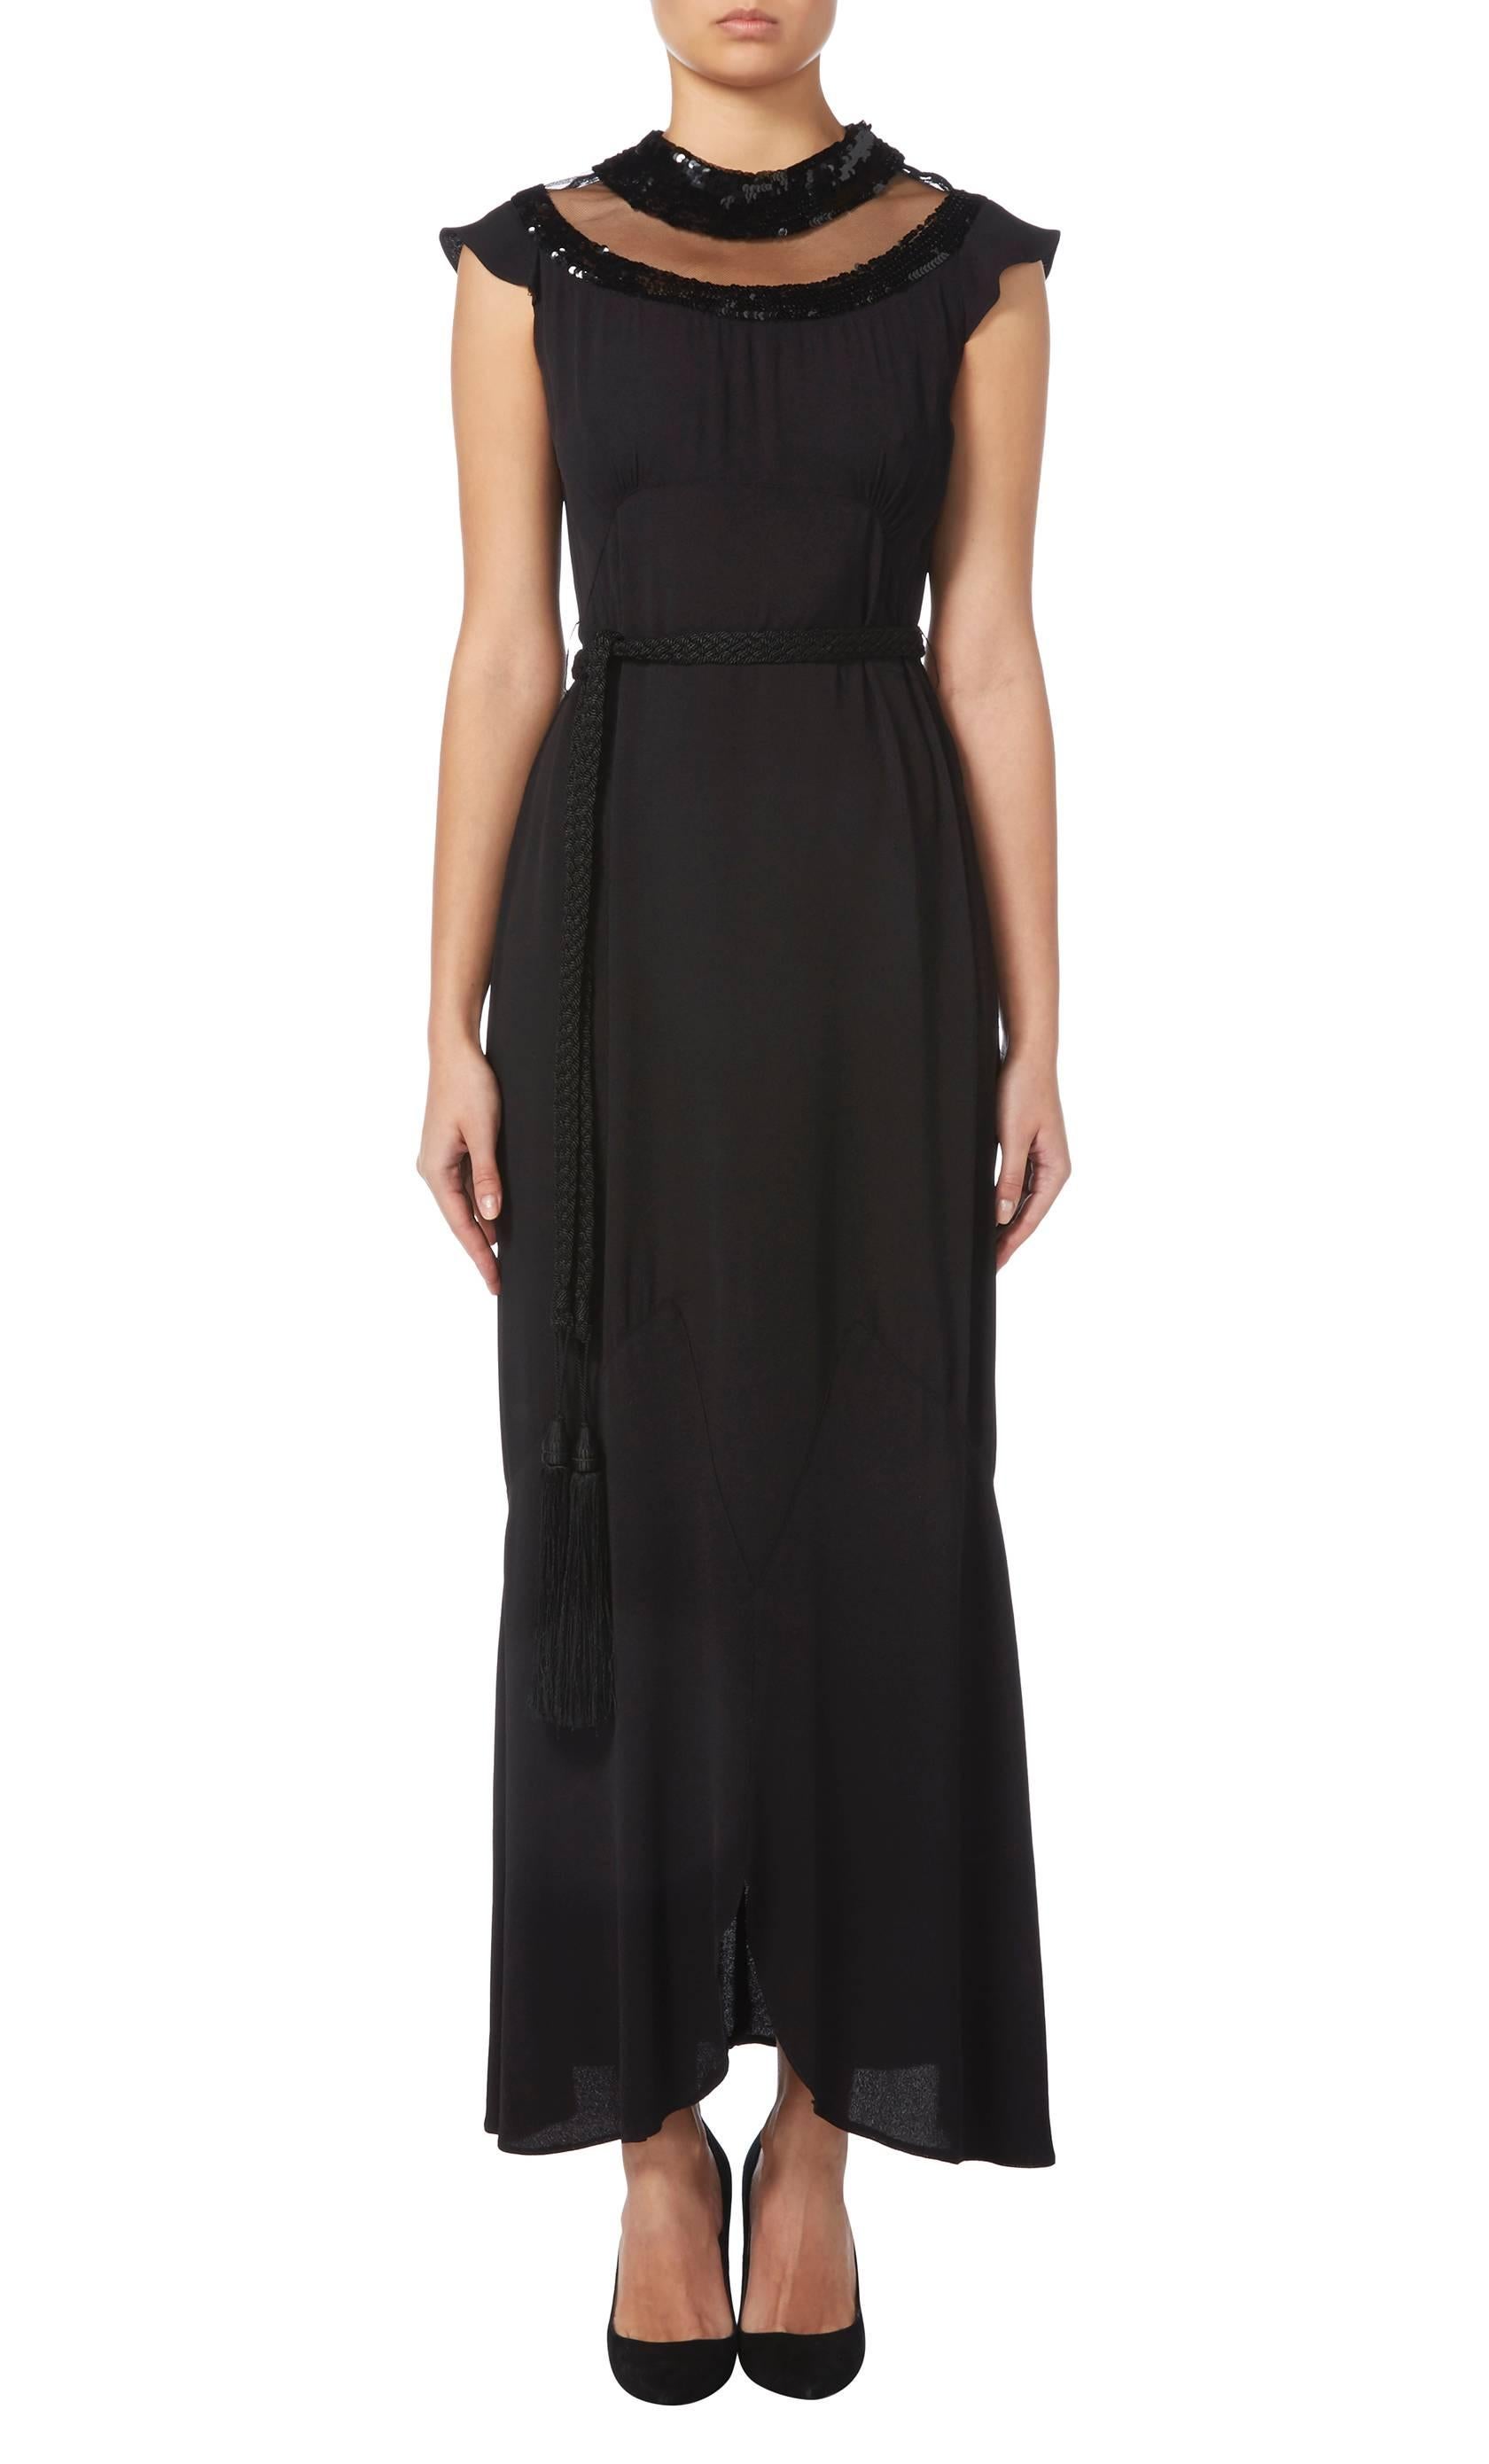 A stunning piece of Jean Patou from the early 1930s, this maxi dress is constructed in black crepe and features a cutaway neckline with a black silk tulle panel trimmed with black sequins, which adds subtle sparkle. Featuring capped sleeves and a